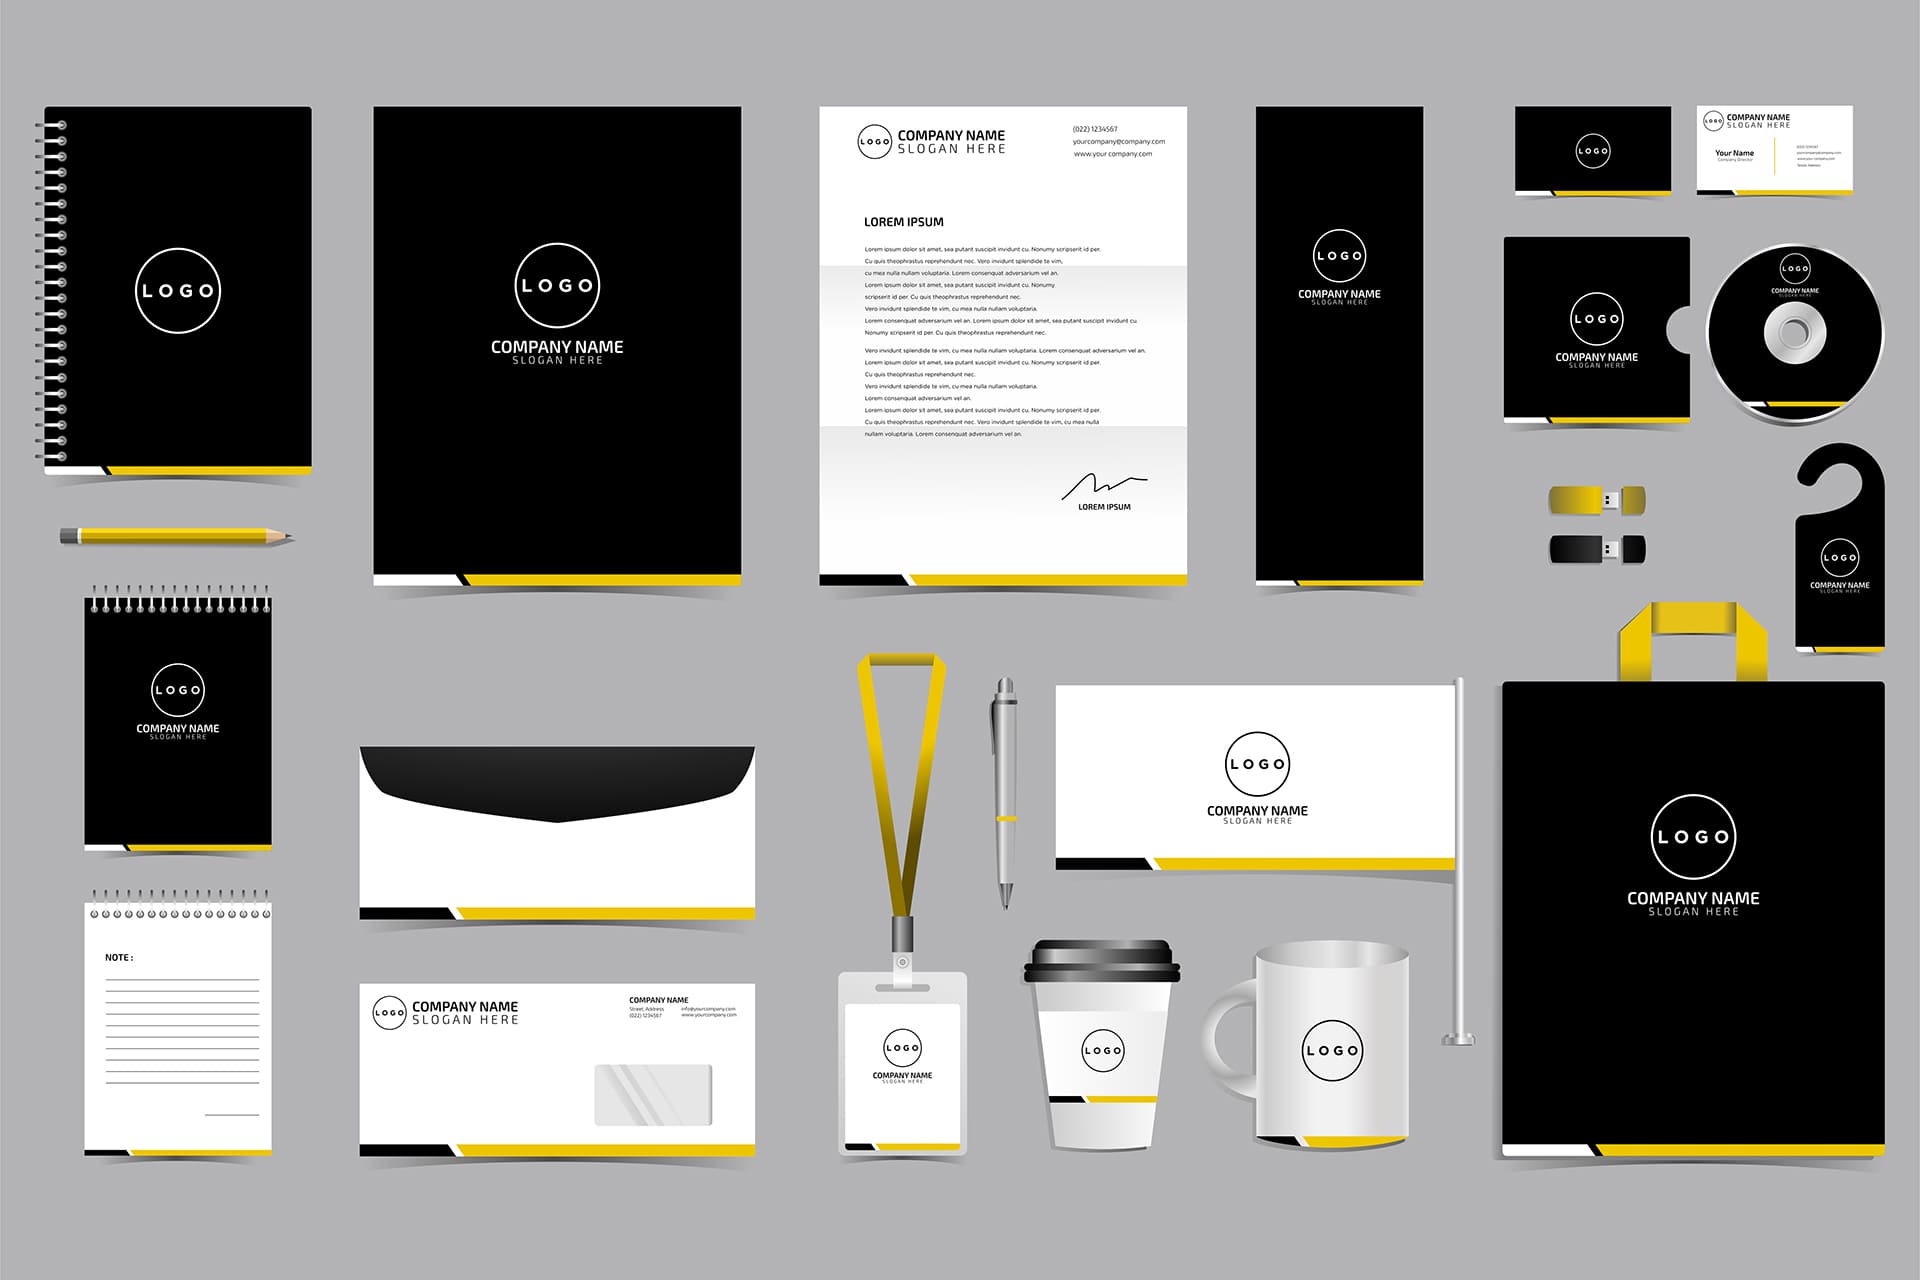 brand-guidelines-example-02-min